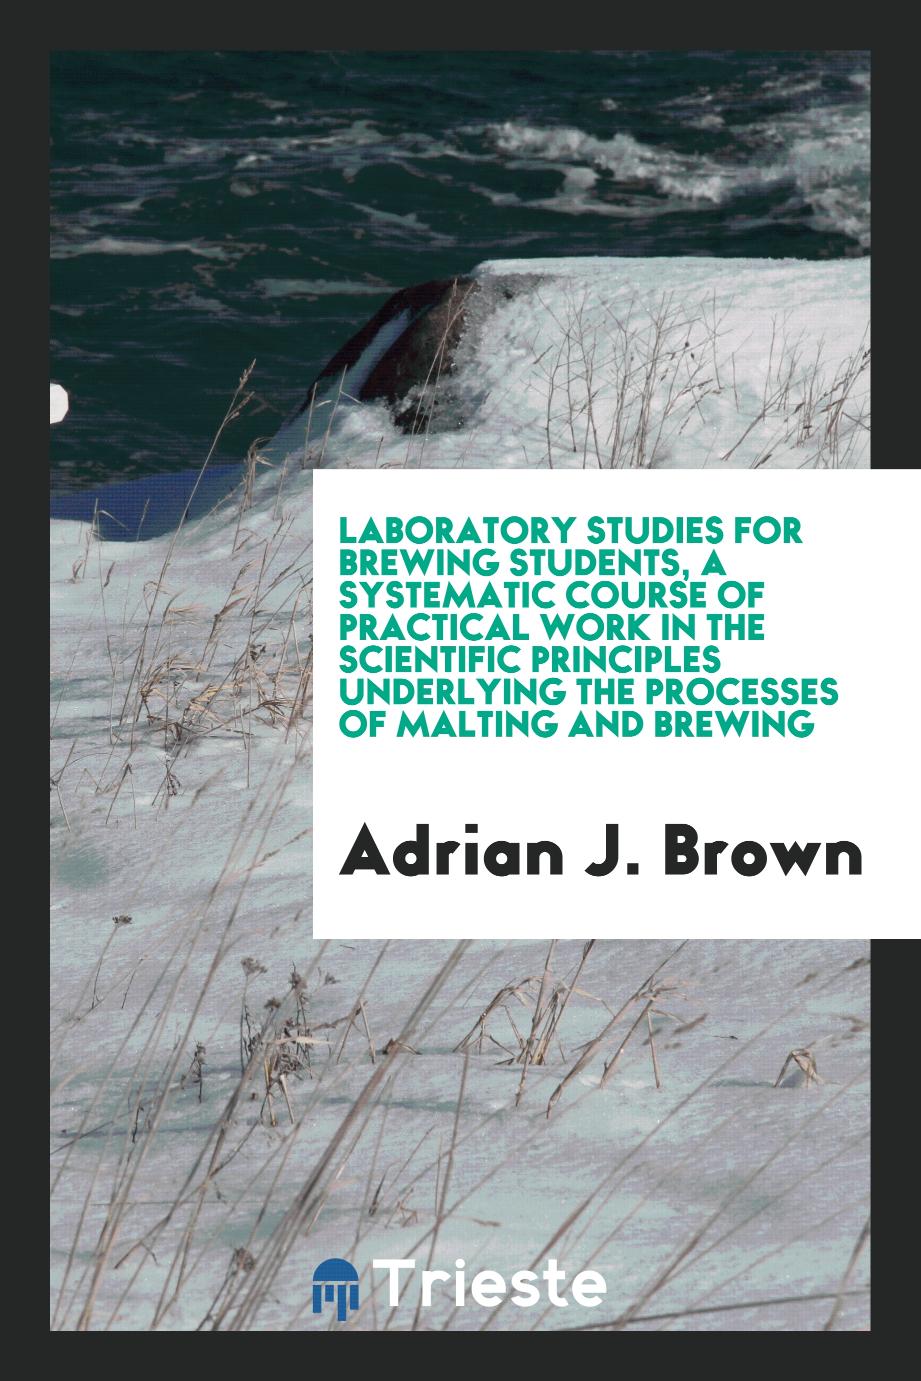 Laboratory studies for brewing students, a systematic course of practical work in the scientific principles underlying the processes of malting and brewing